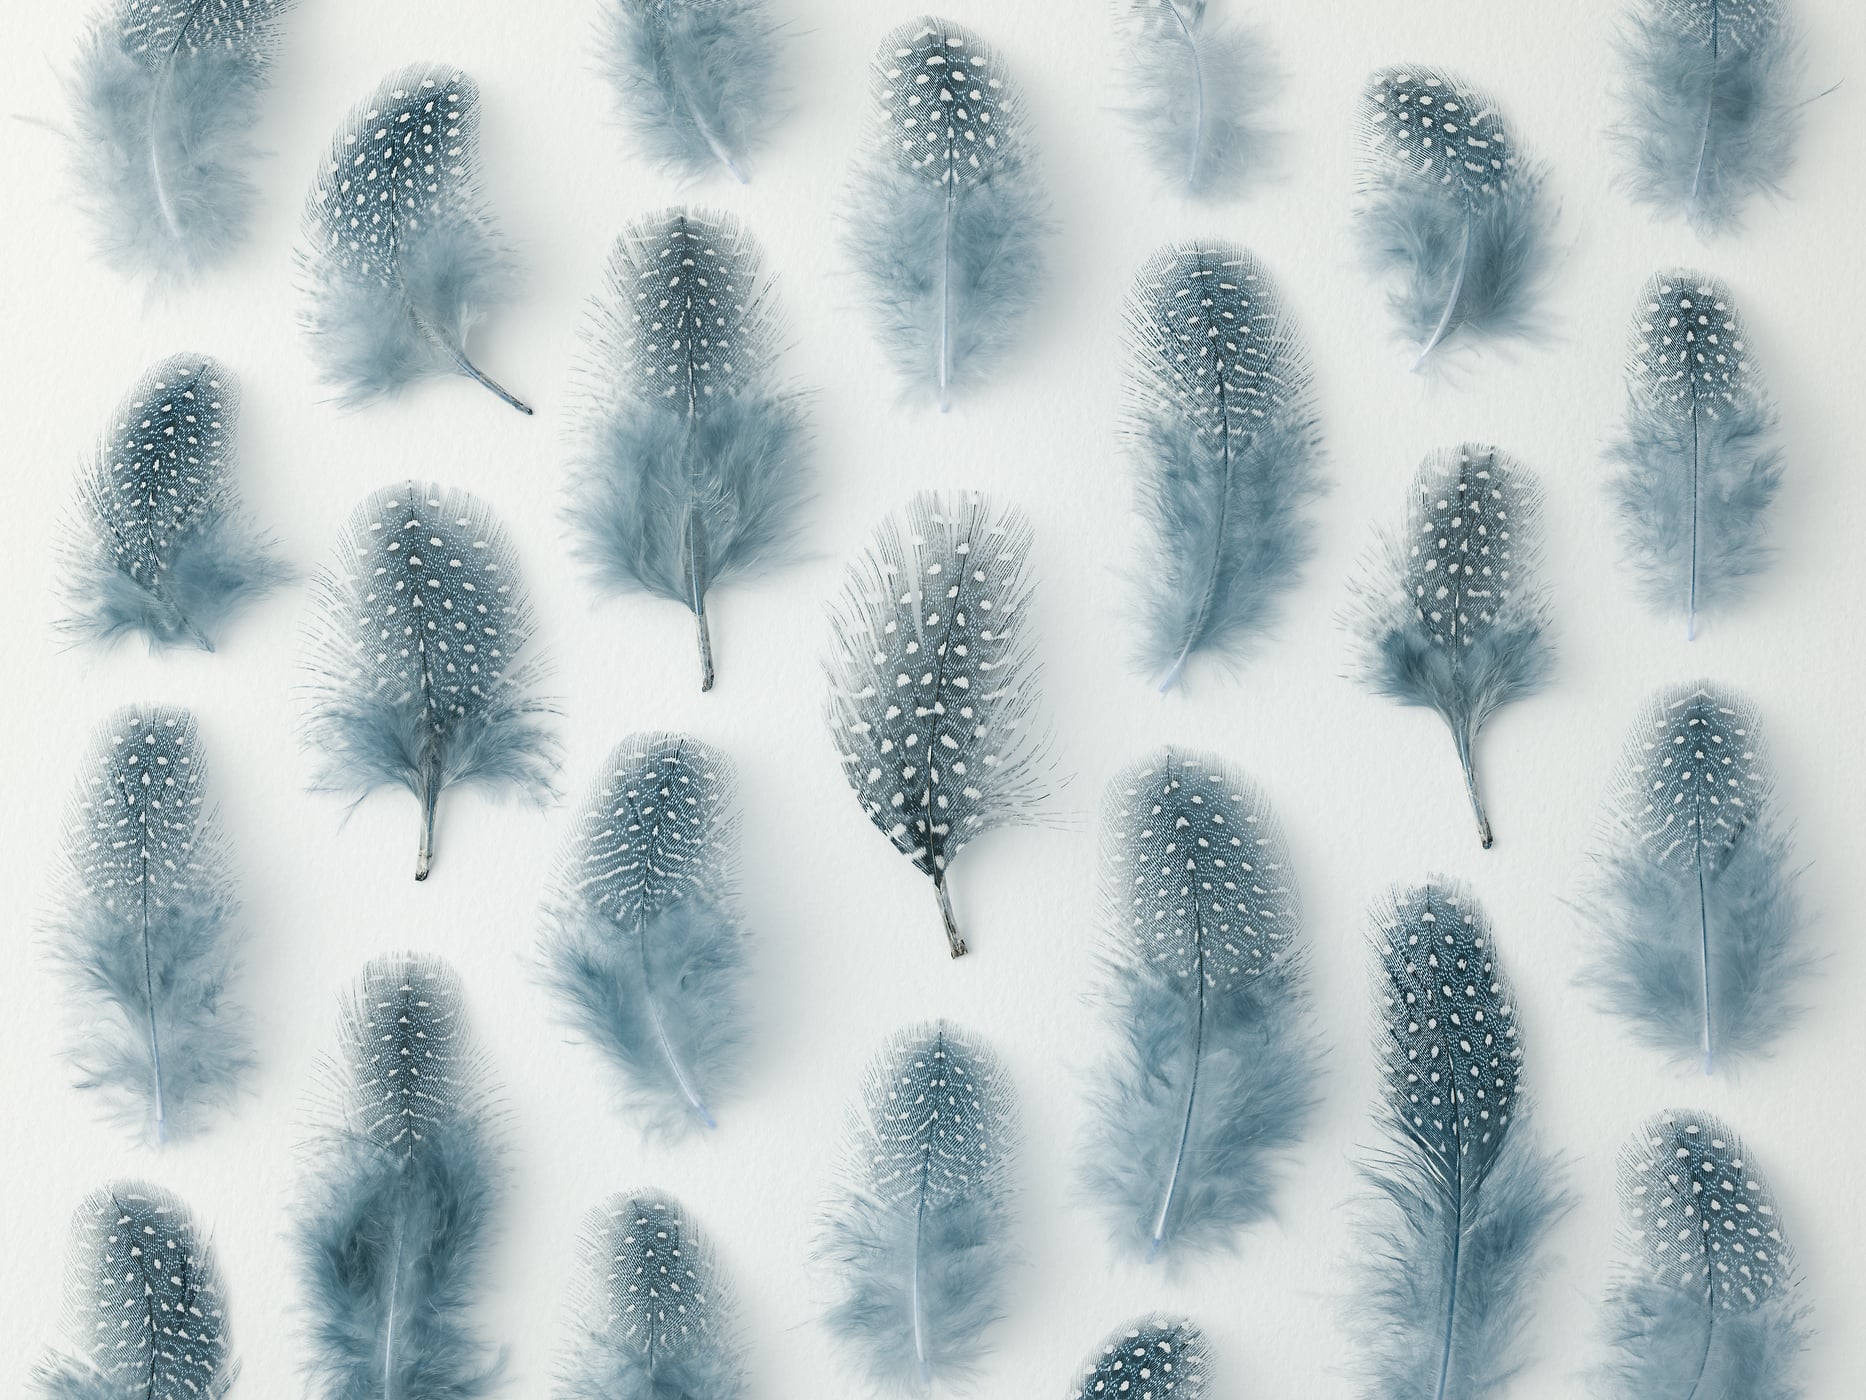 407 megapixels! A very high resolution, large-format VAST photo print of a pattern of teal-colored feathers; macro photograph created by Assaf Frank.